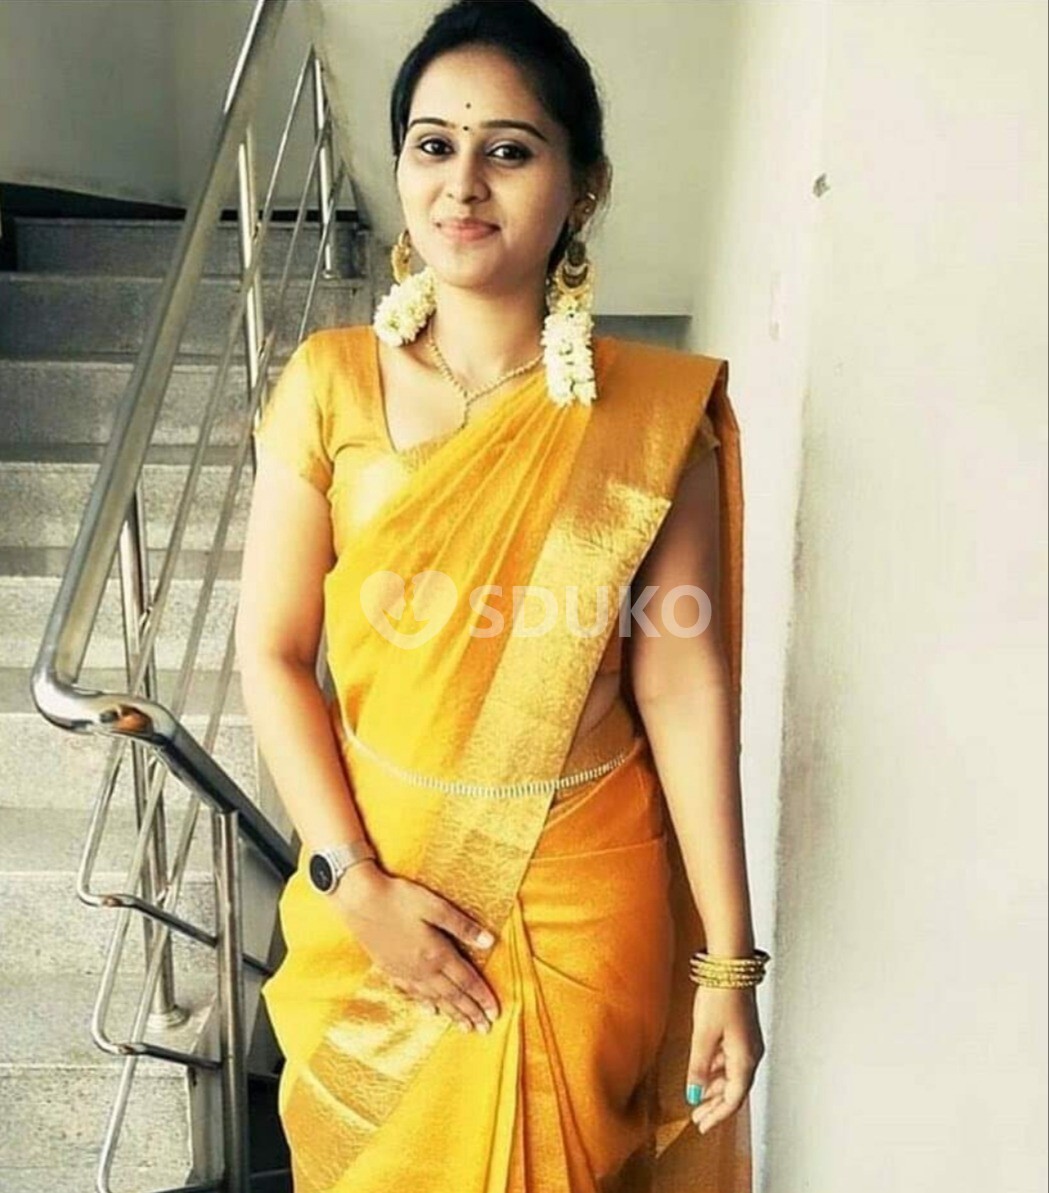 hosur .shot 1500 night 5000 .. 💯 Safe.🥰AFFORDABLE AND CHEAPEST CALL GIRL SERVICE